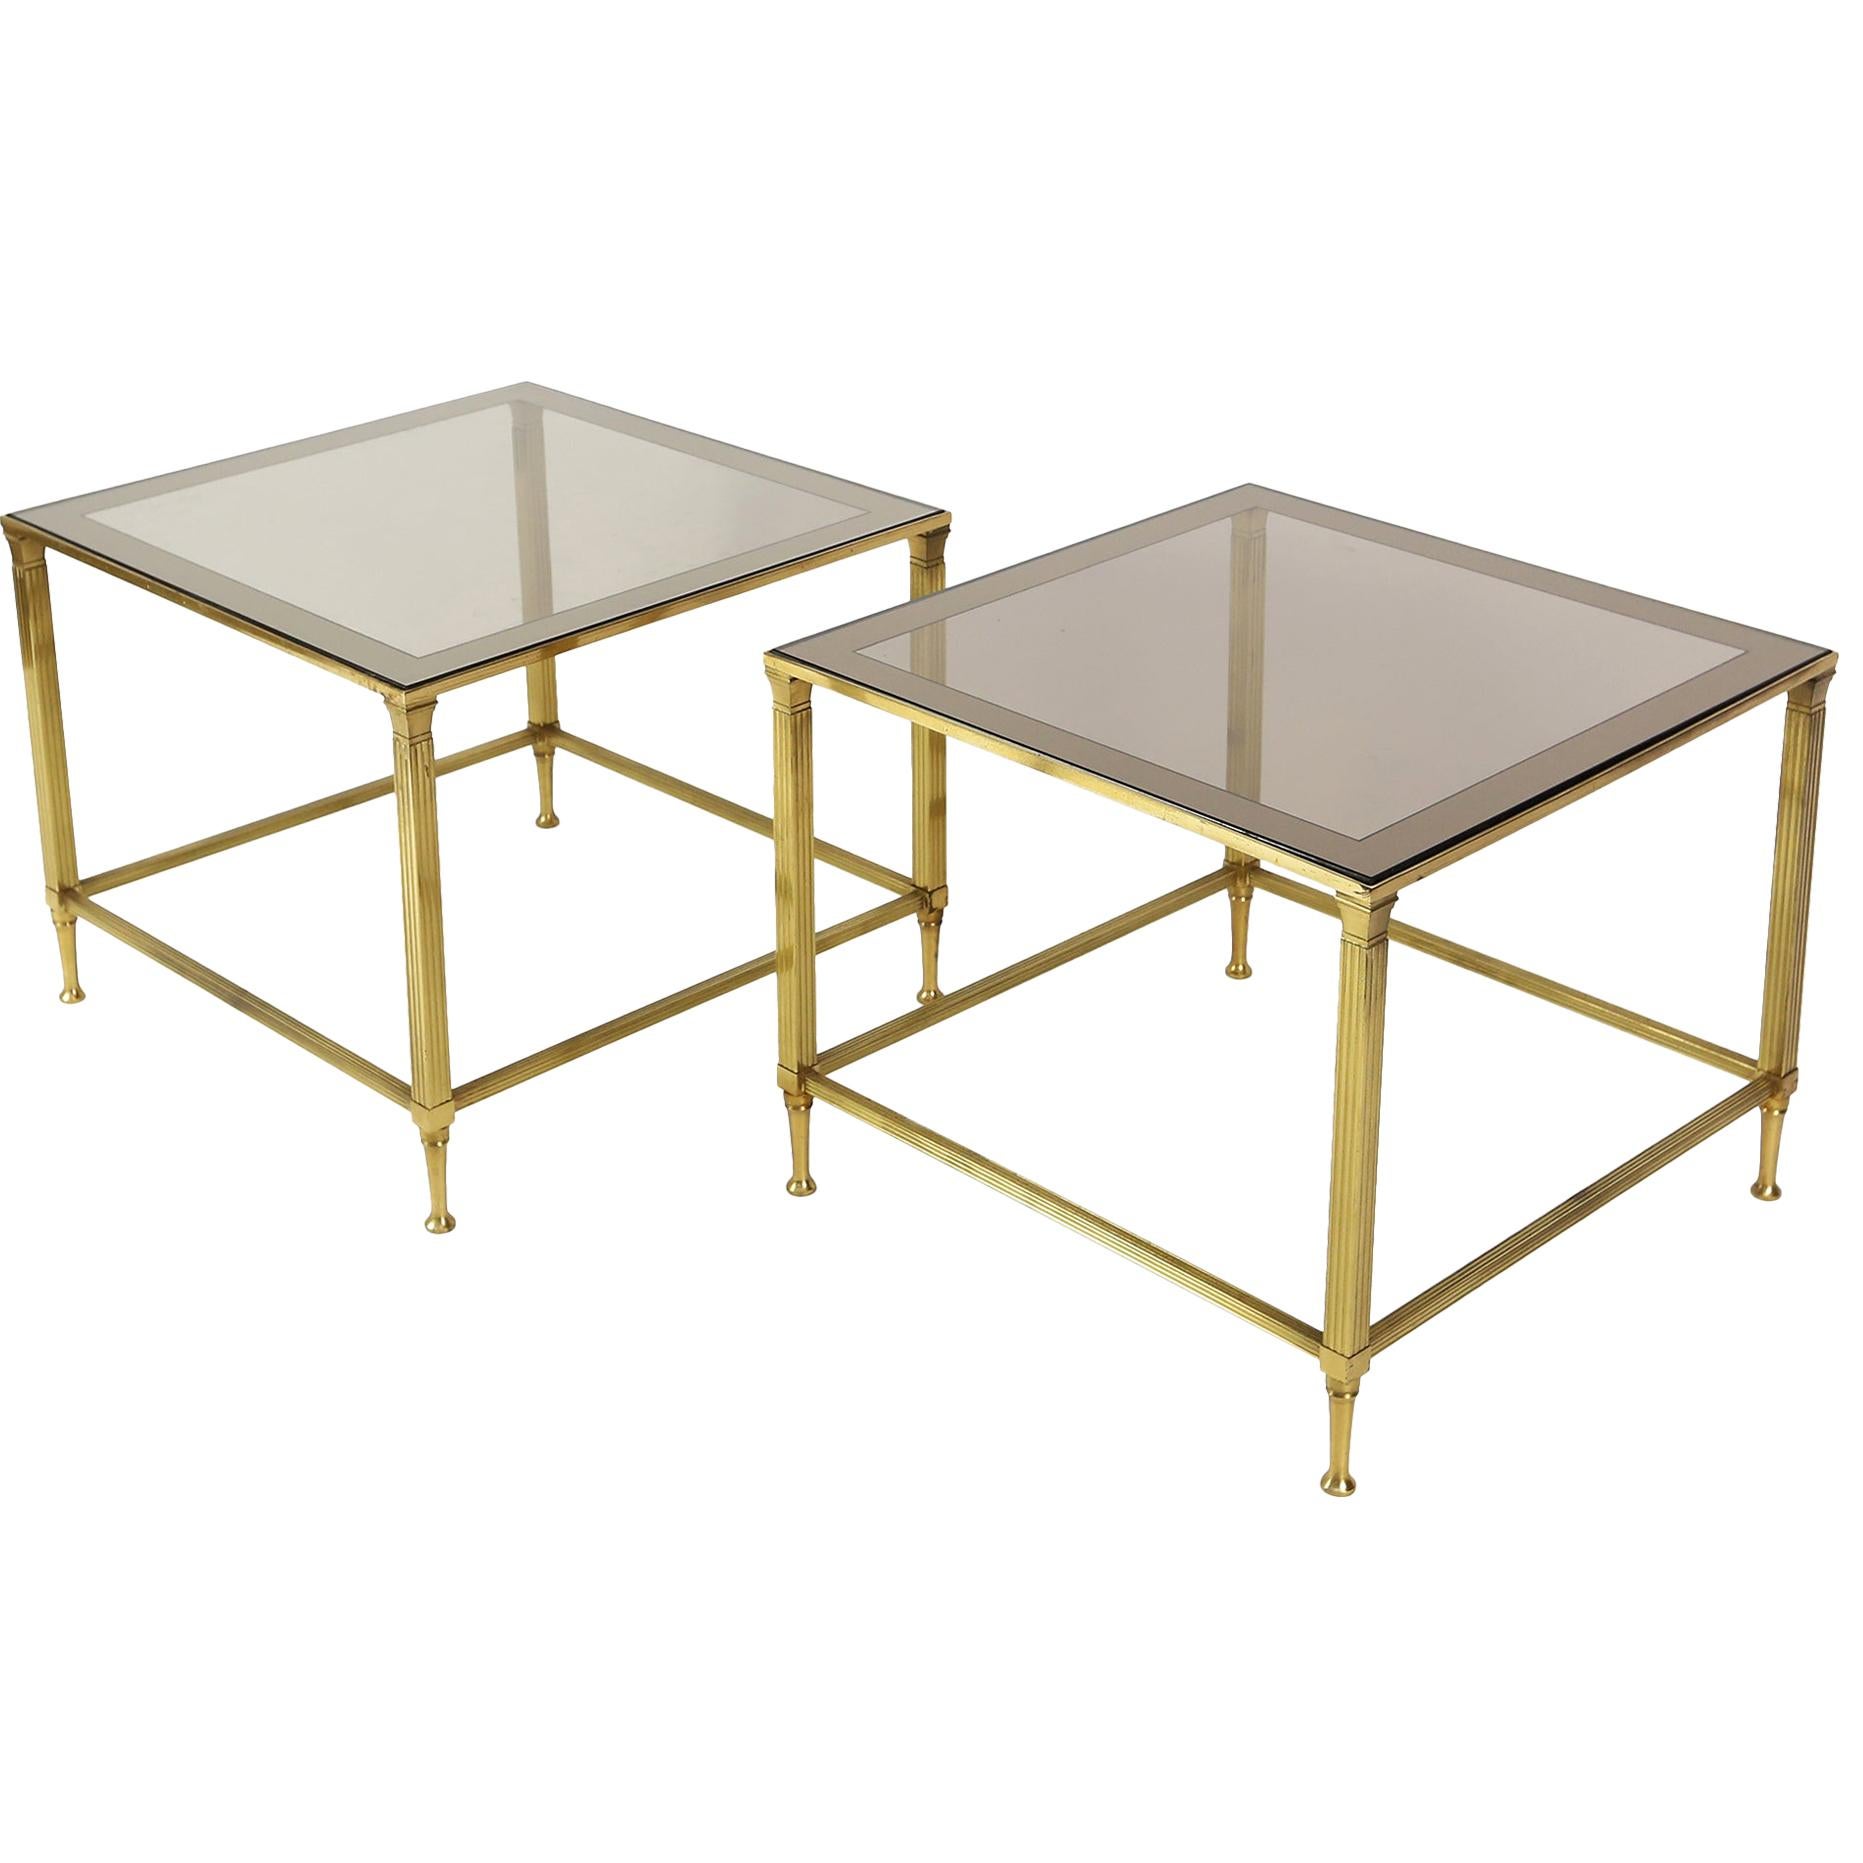 Pair of Midcentury Side Tables by Maison Jansen, France, 1950s For Sale